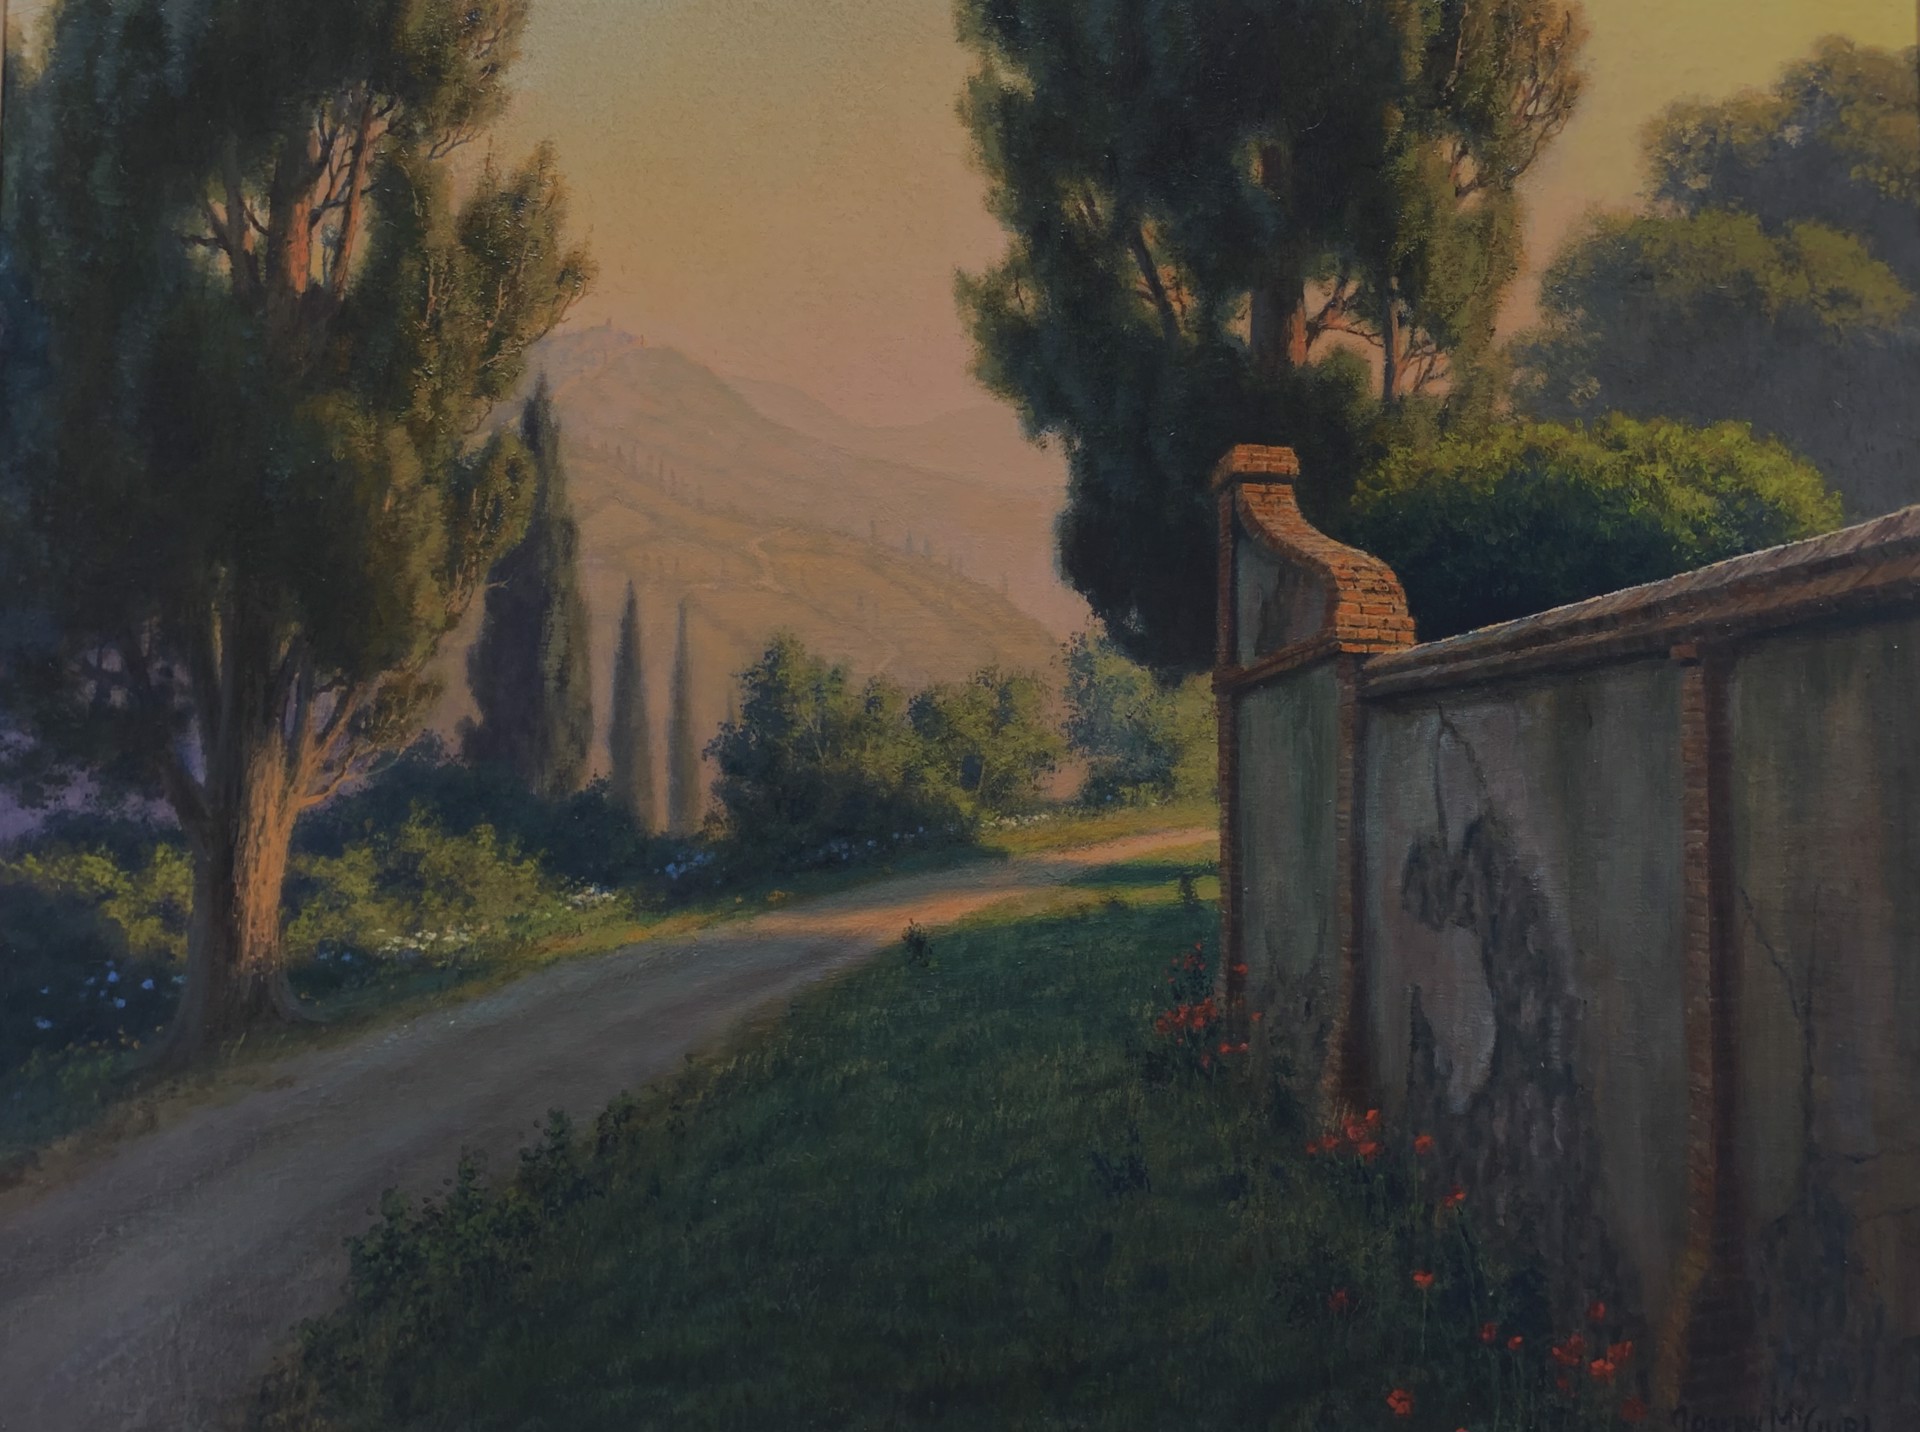 Late Afternoon Tuscan Light by Joseph McGurl